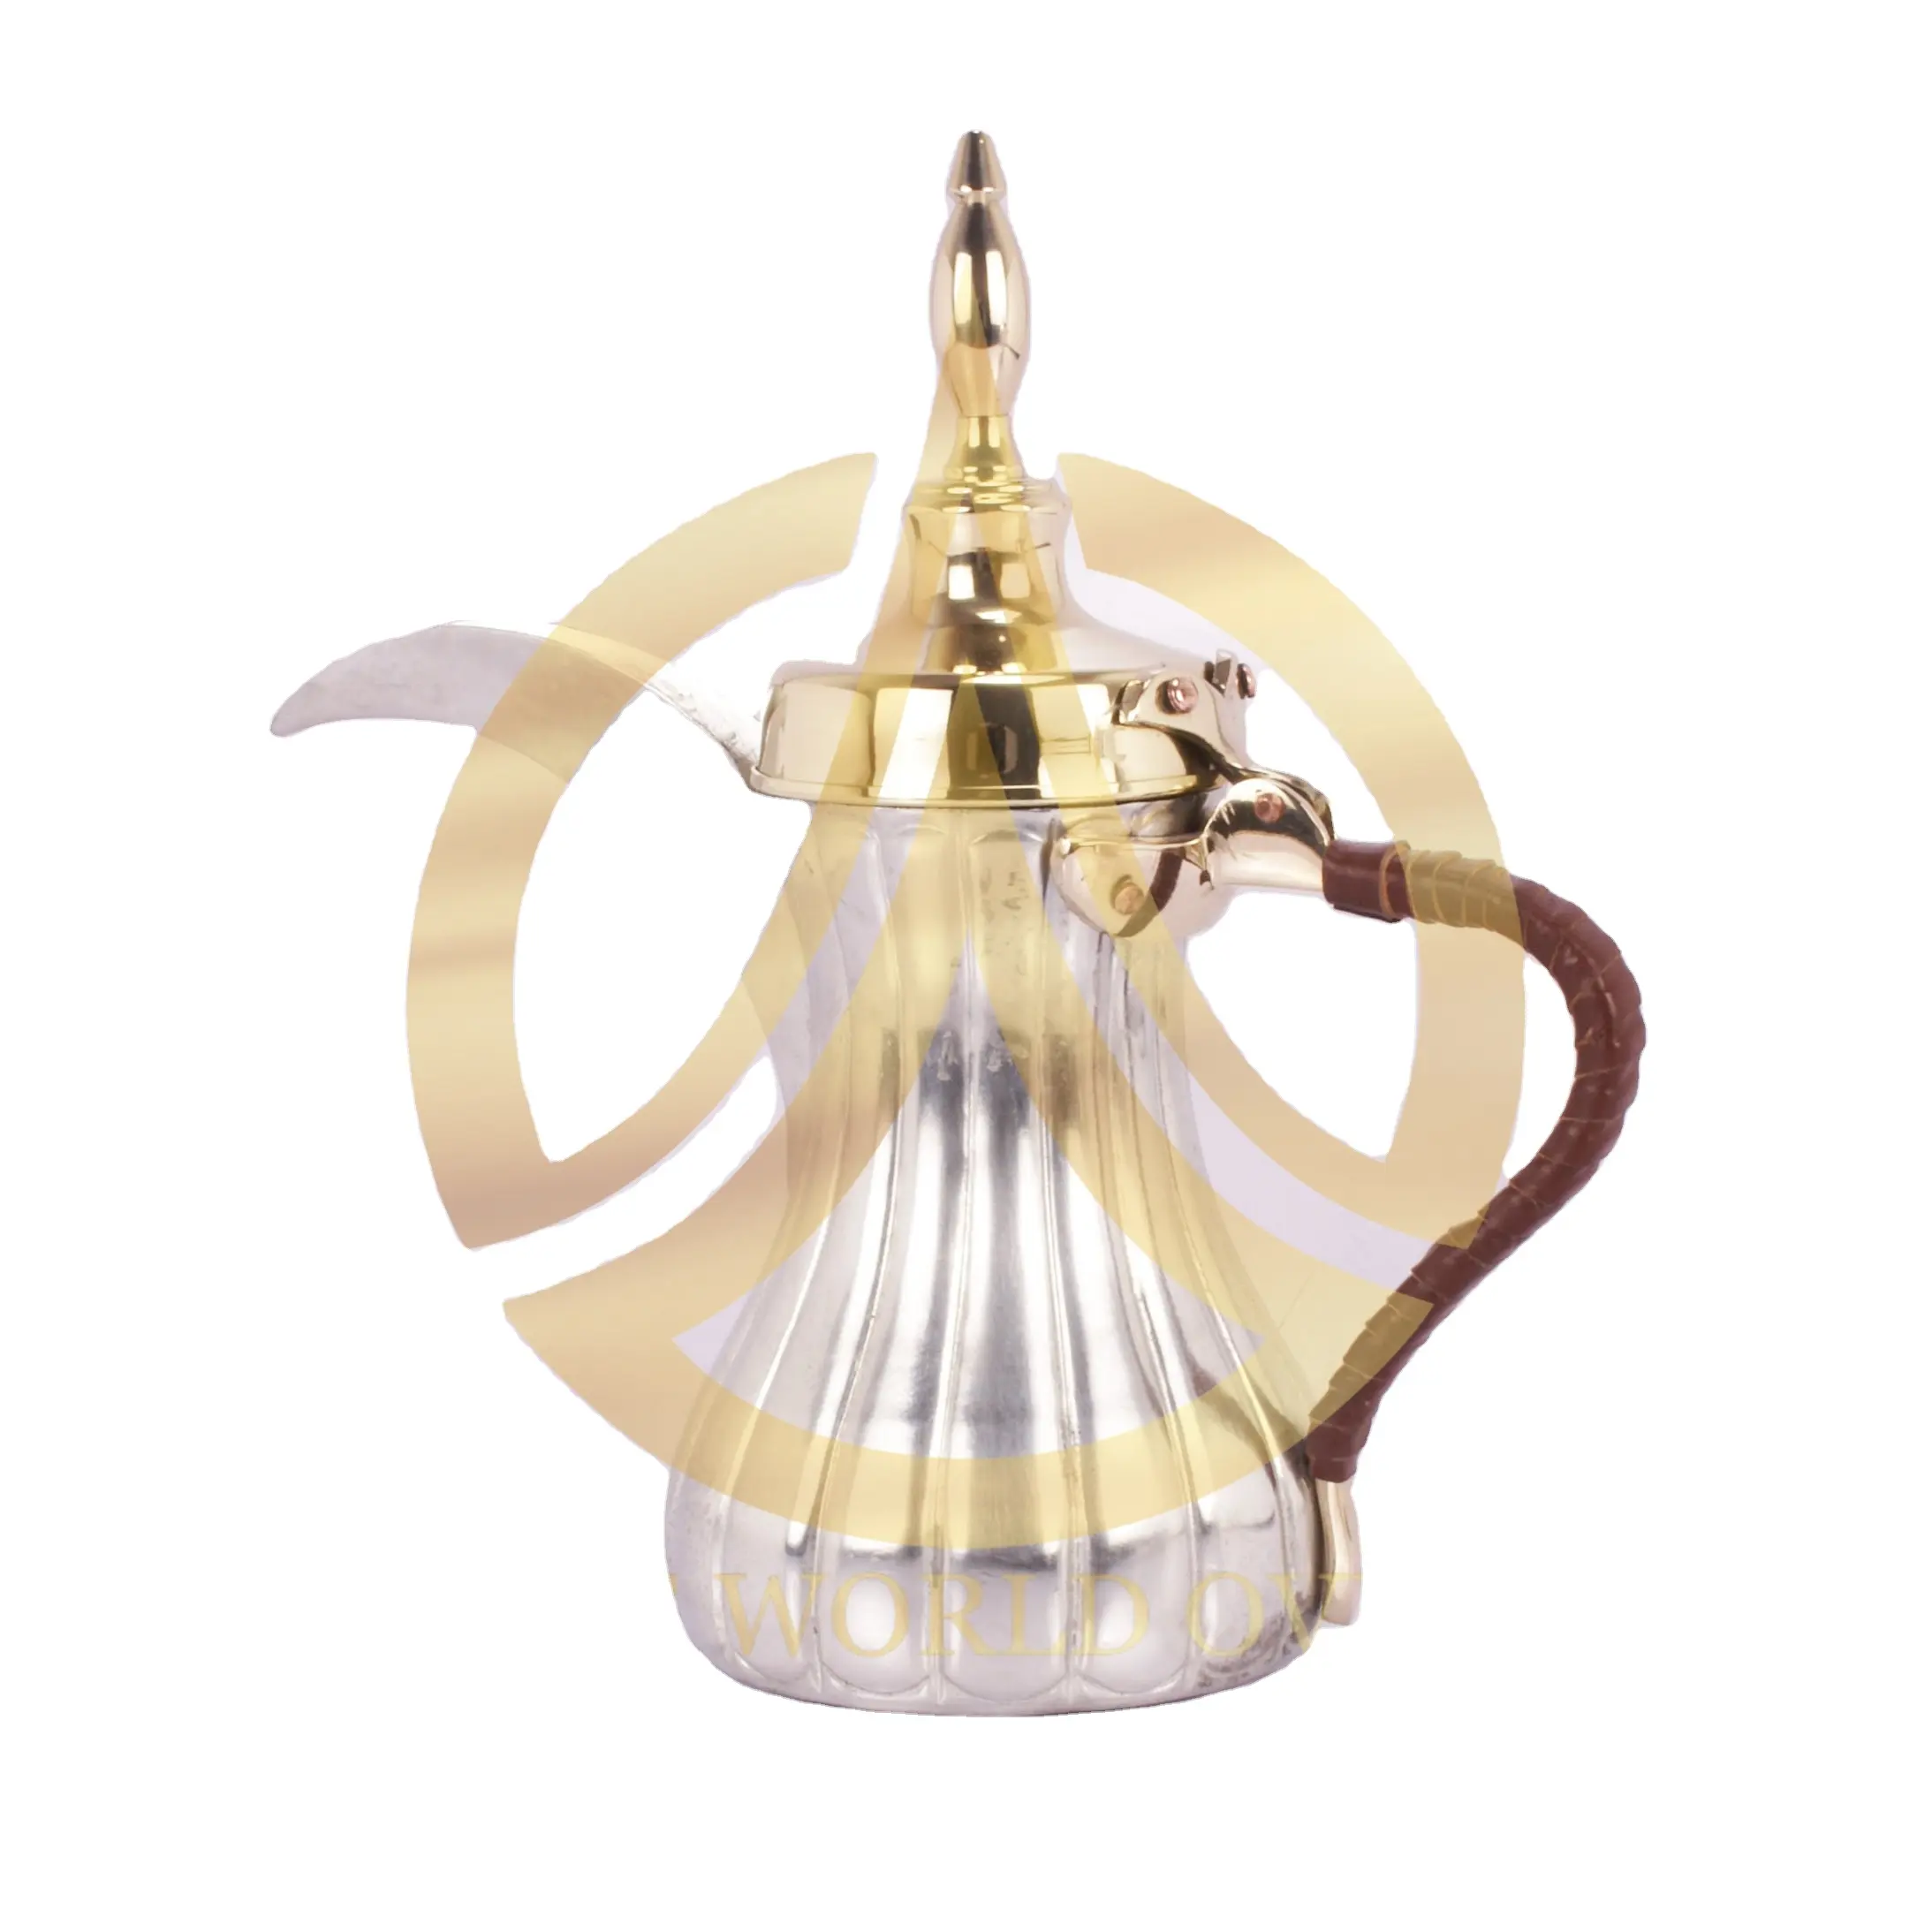 Arabic Brass Metal Turkish Dallah Coffee Pot High Quality And best Manufacturing In Whole Sale Price Top Selling Dallah